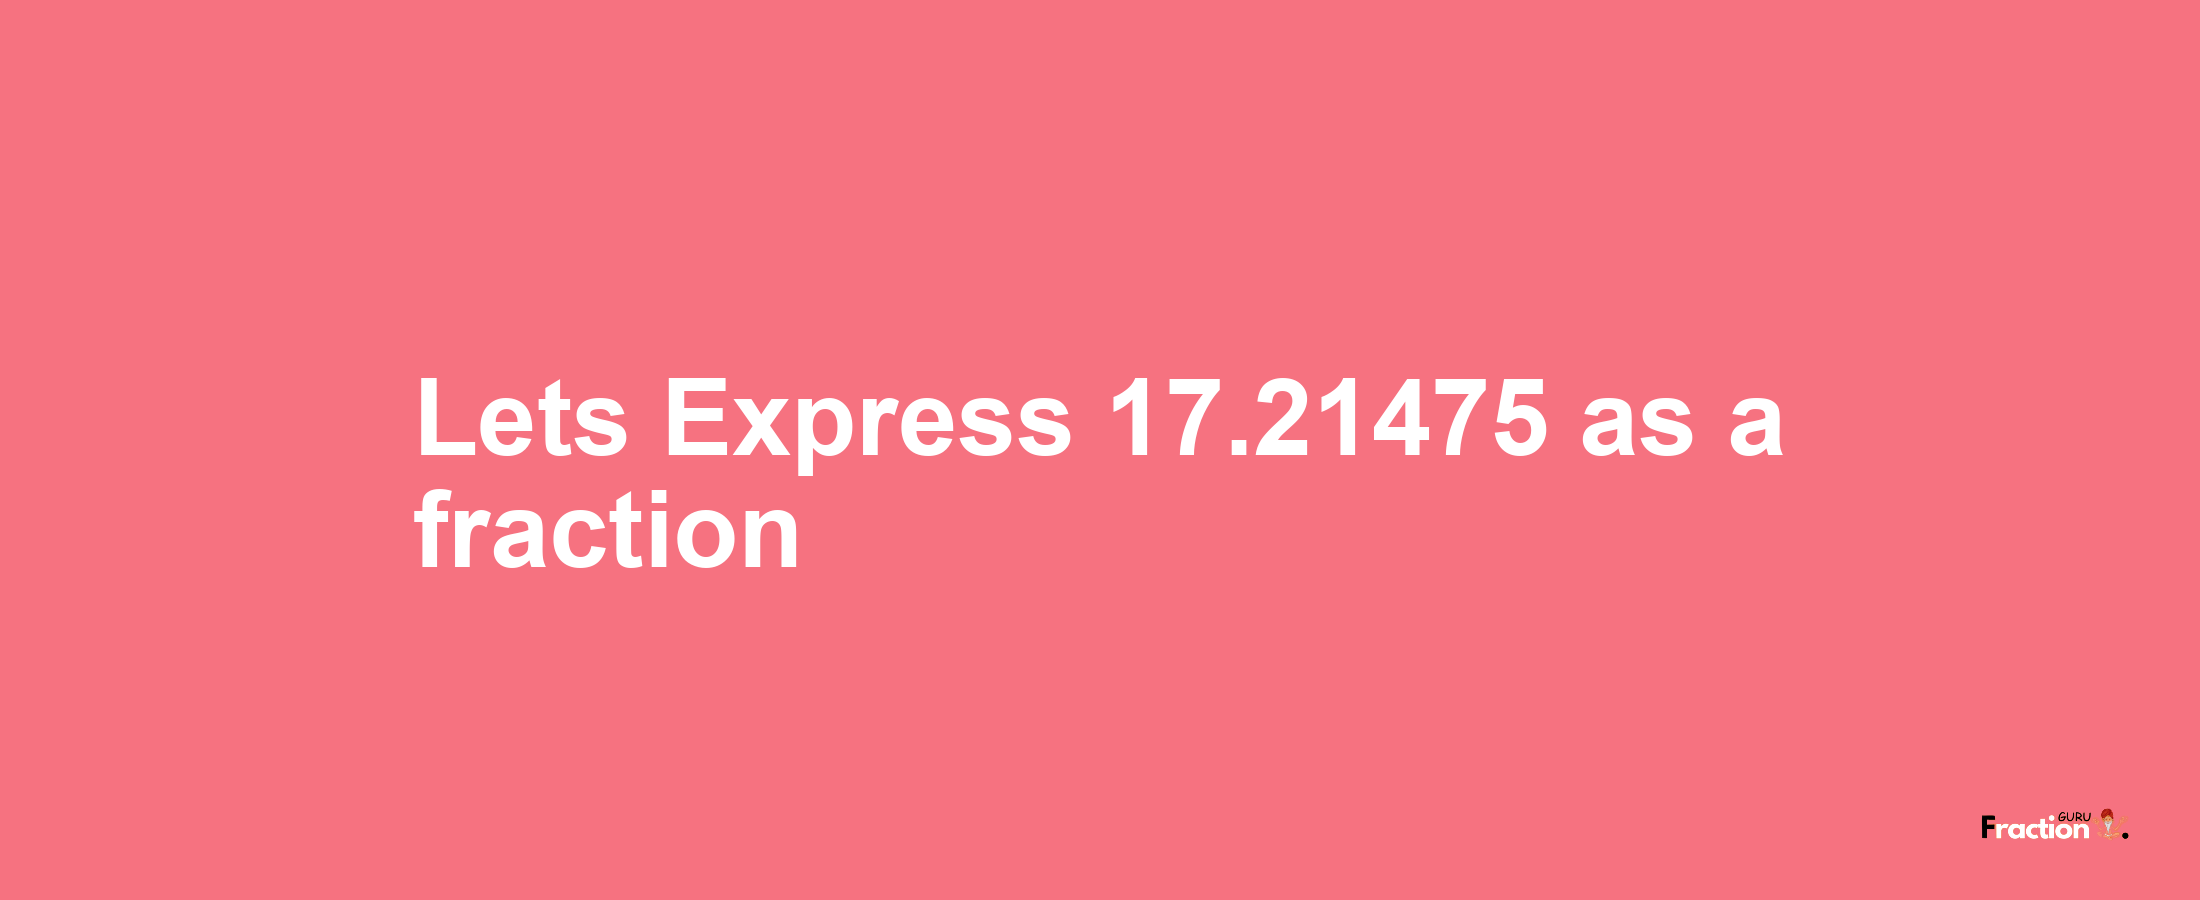 Lets Express 17.21475 as afraction